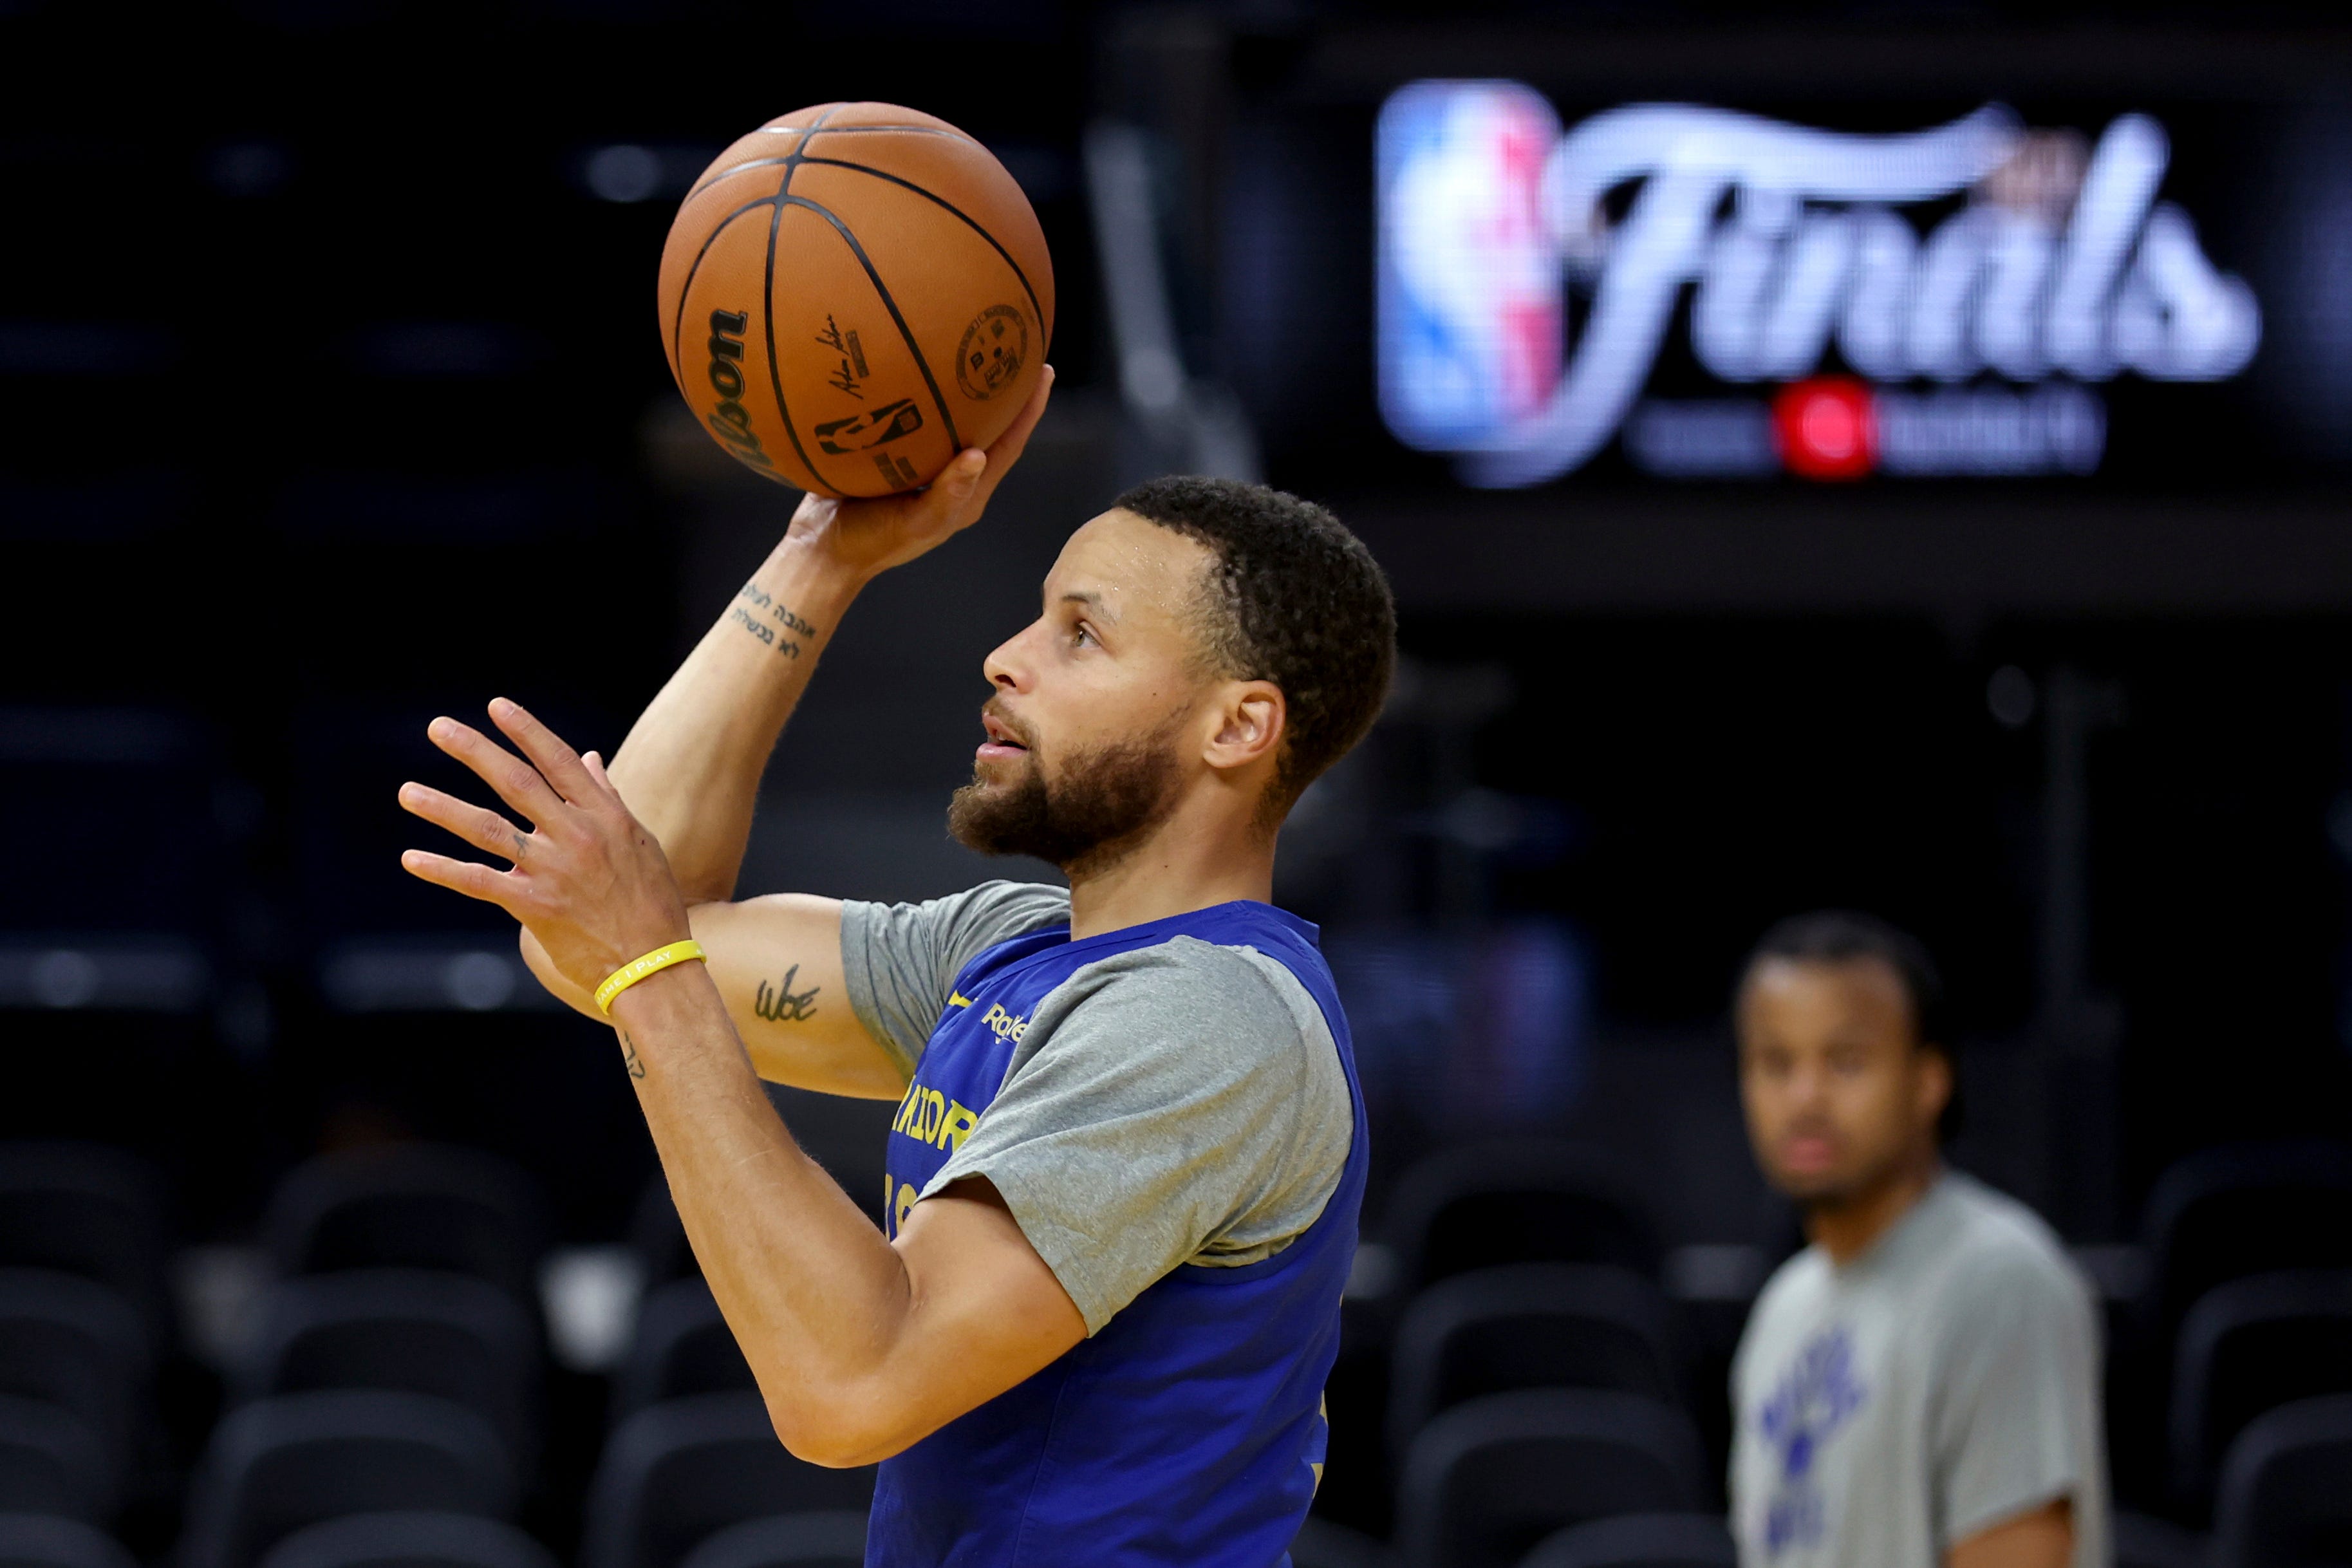 Stephen Curry preparing to shoot a basketball with one hand.